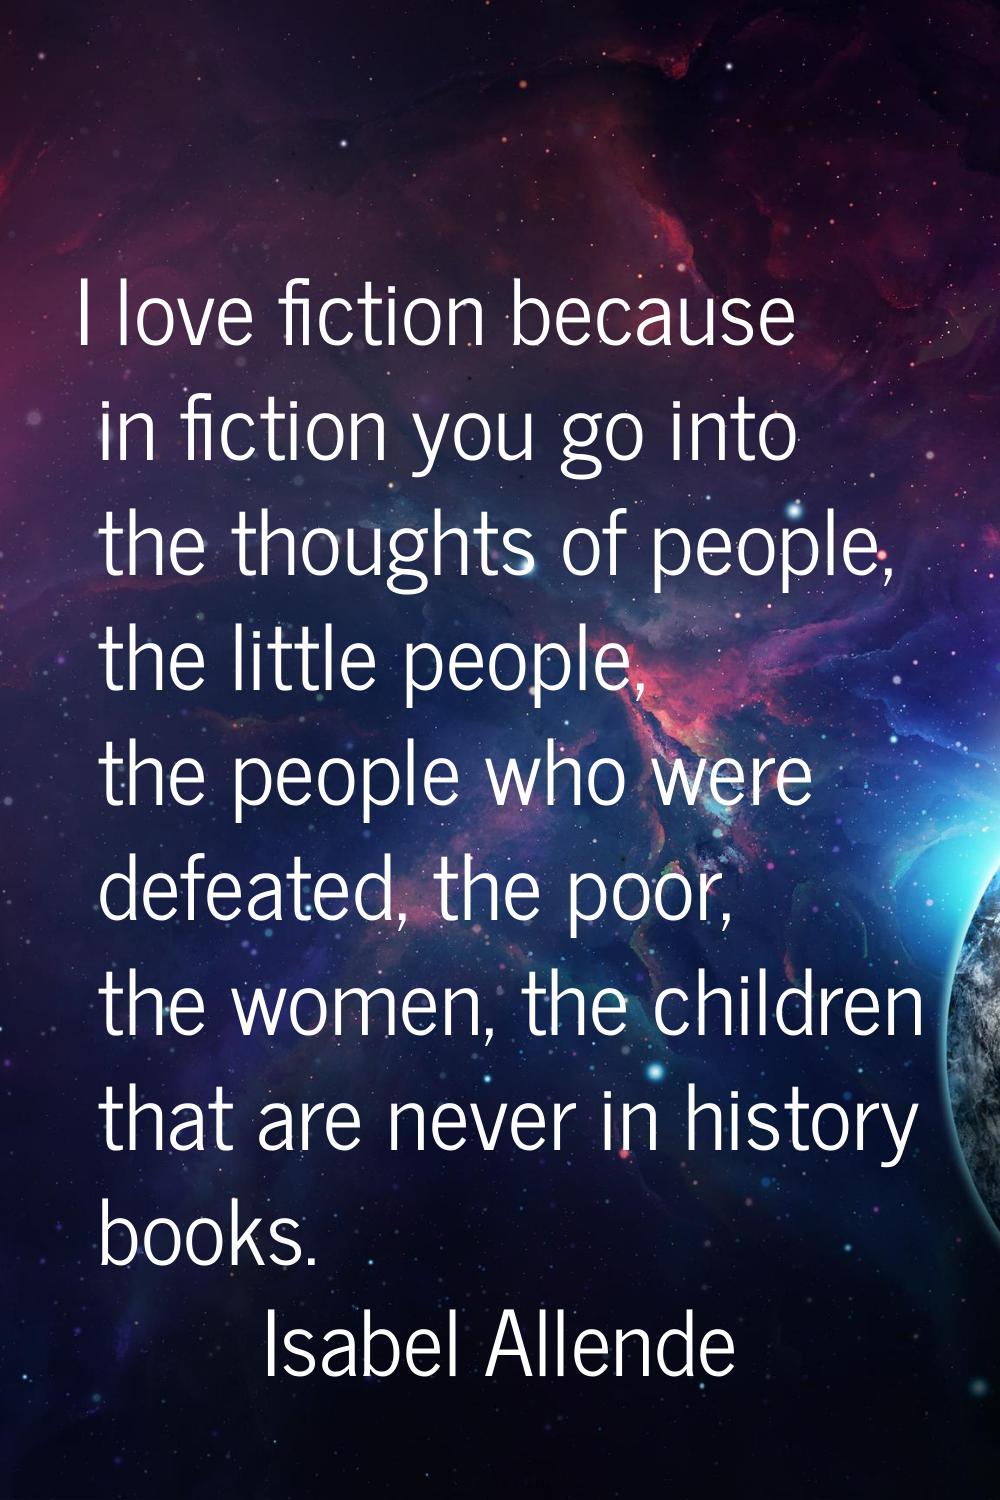 I love fiction because in fiction you go into the thoughts of people, the little people, the people